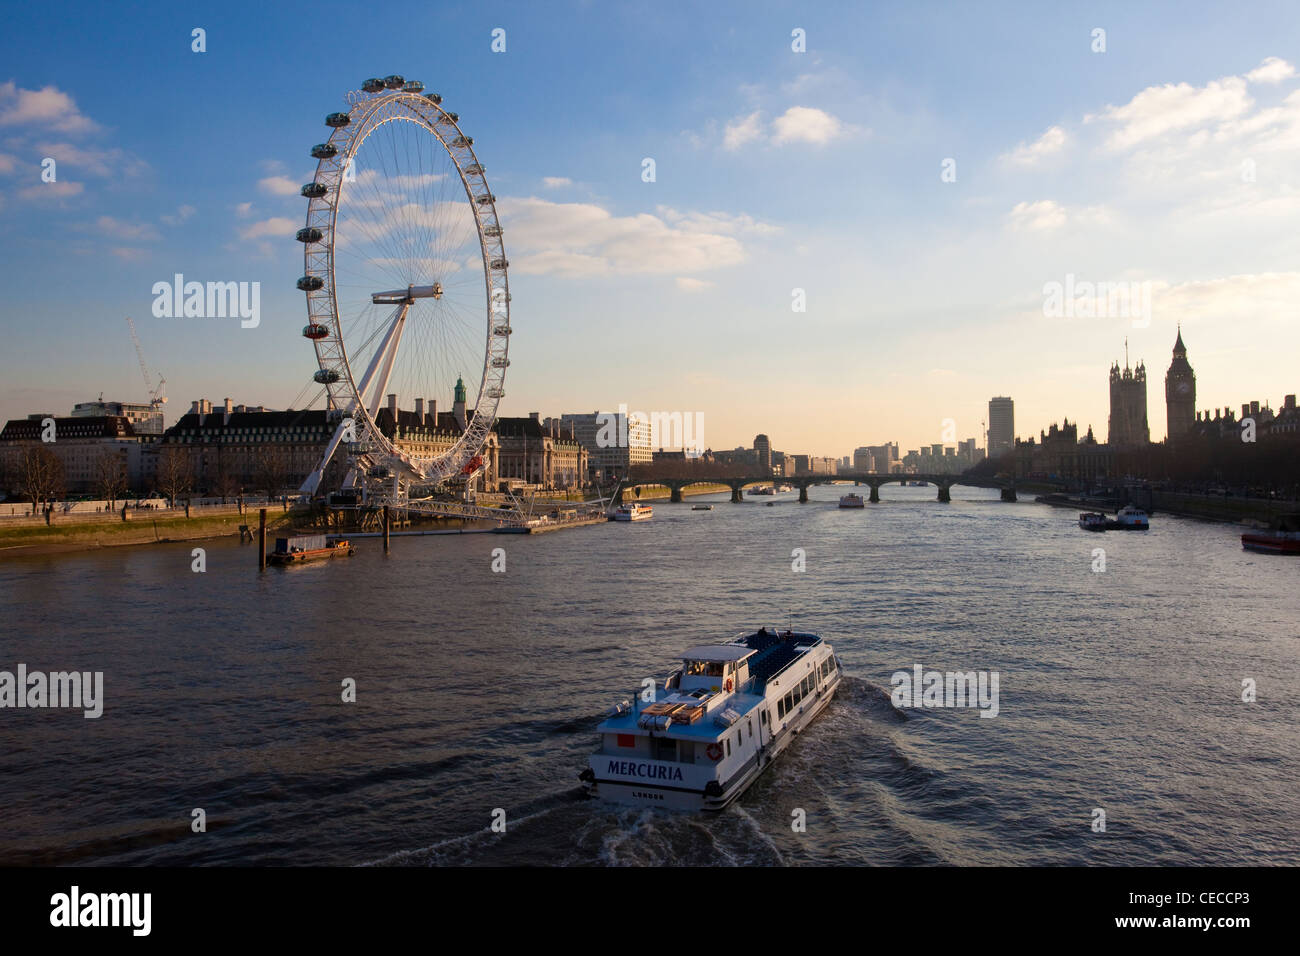 View over the London Eye and Westminster as a passenger boat cruises down the River Thames, Central London, England, UK. Stock Photo